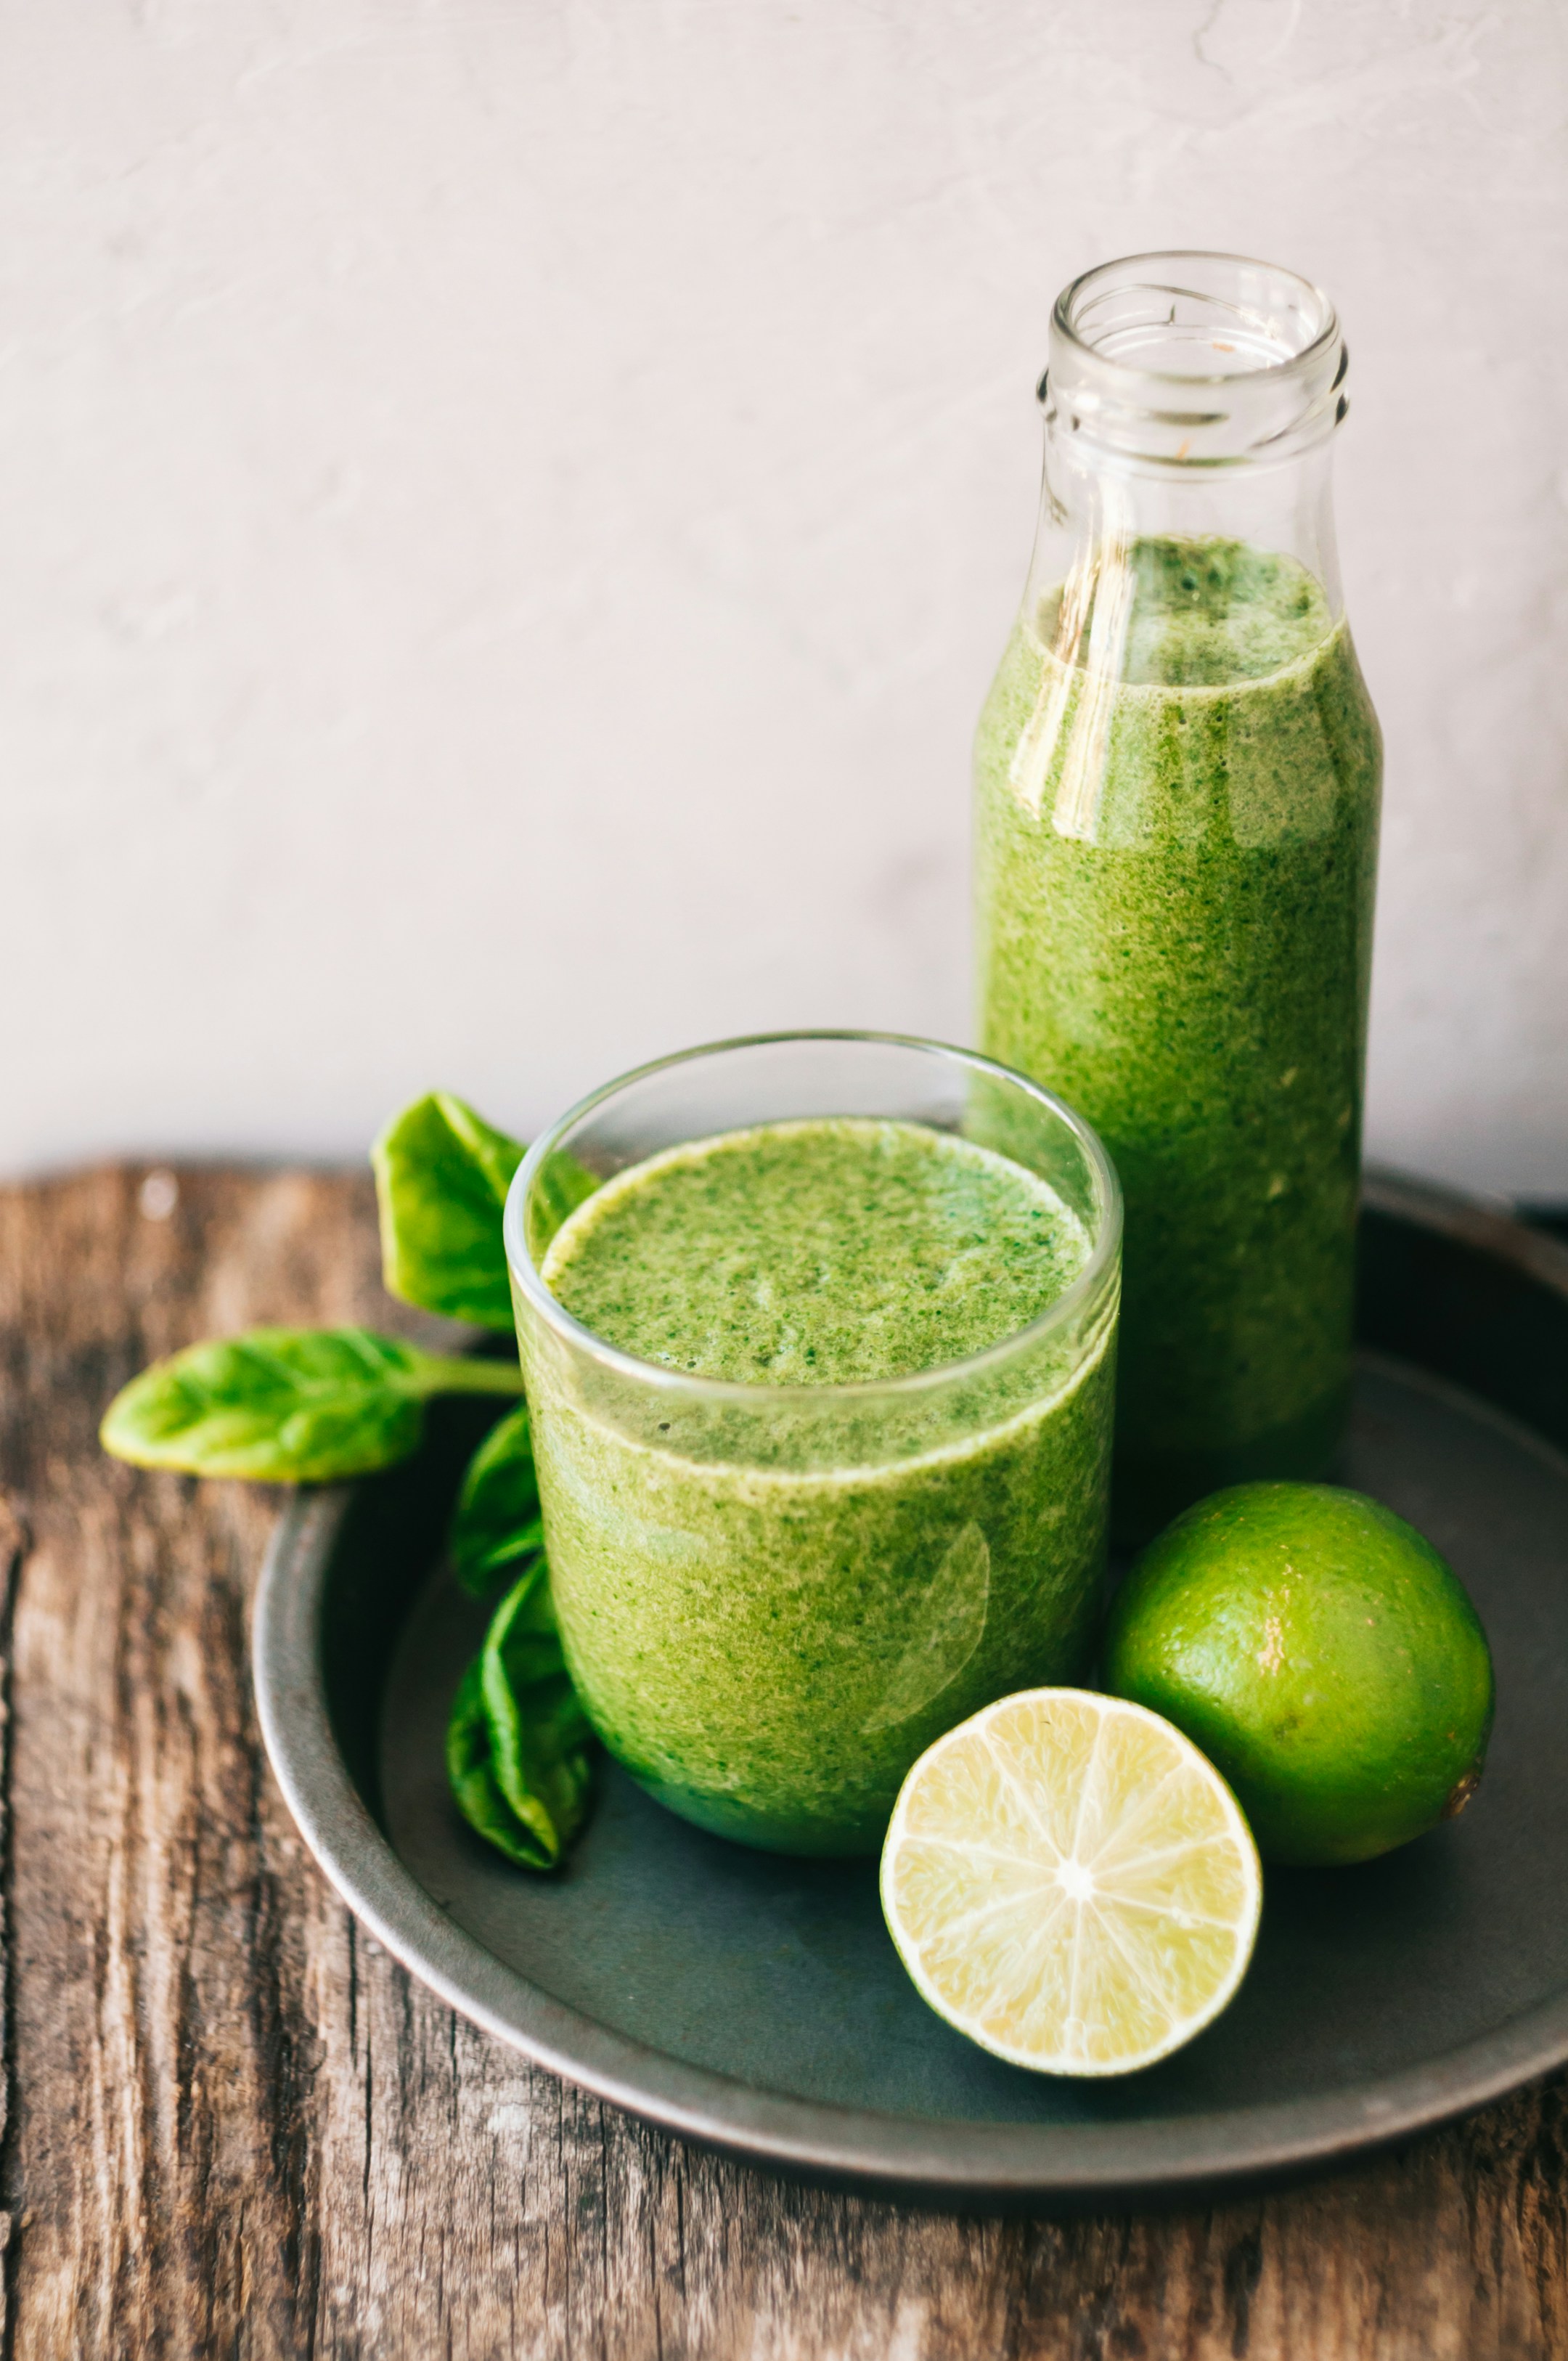 How To Make Healthy Green Juice